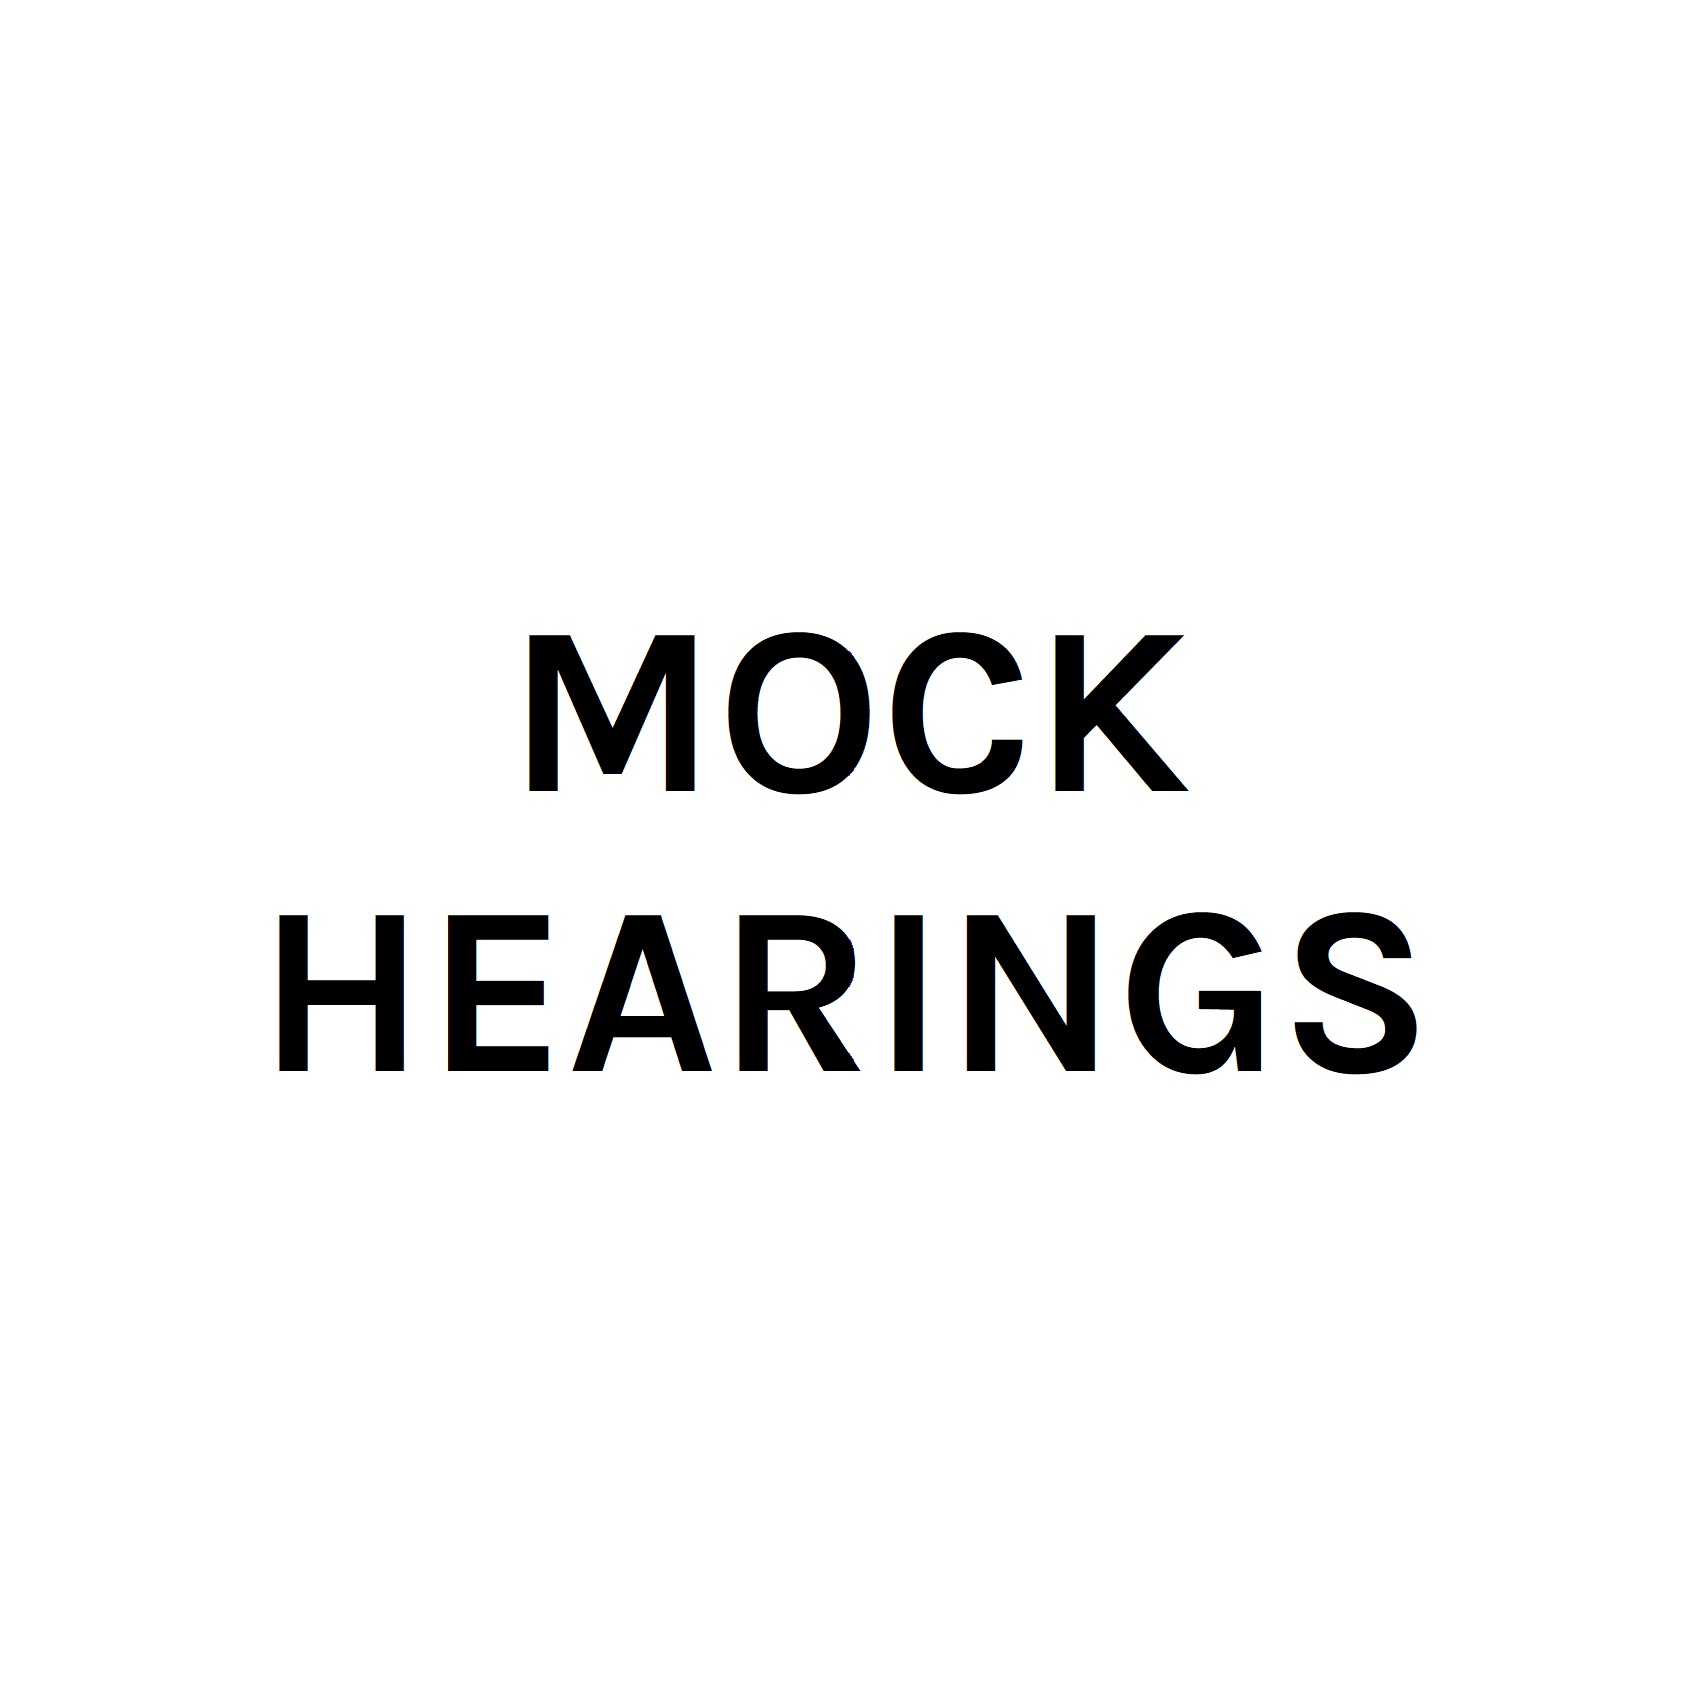 https://delosdr.org/index.php/remote-oral-advocacy-programme/mock-hearings/